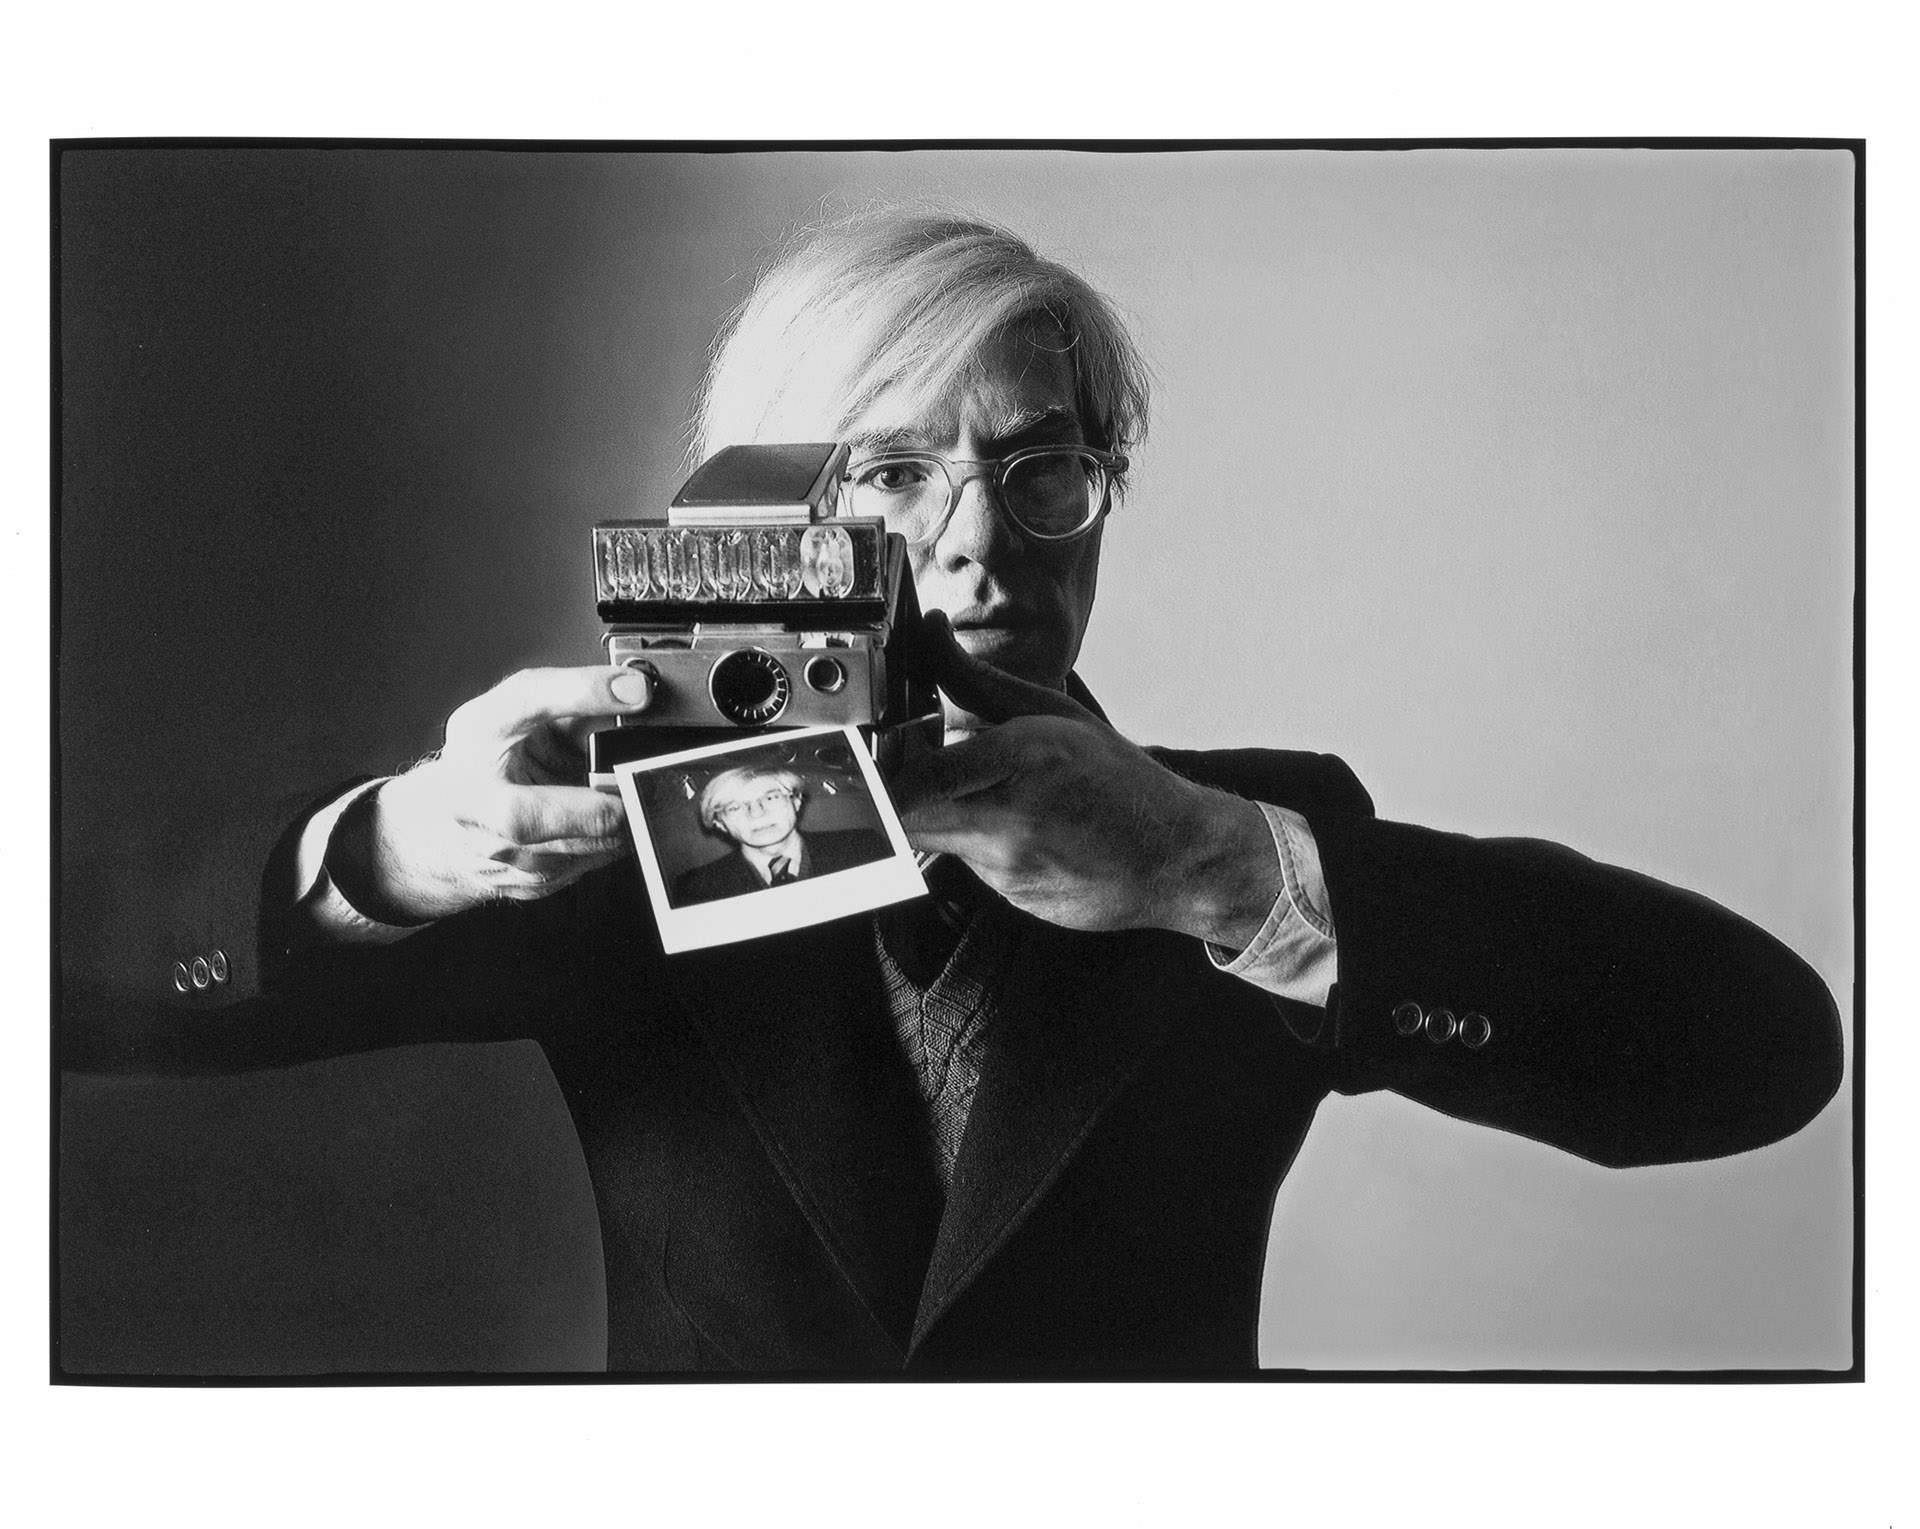 A Massive Andy Warhol Photography Exhibition Is Coming to Australia in 2023